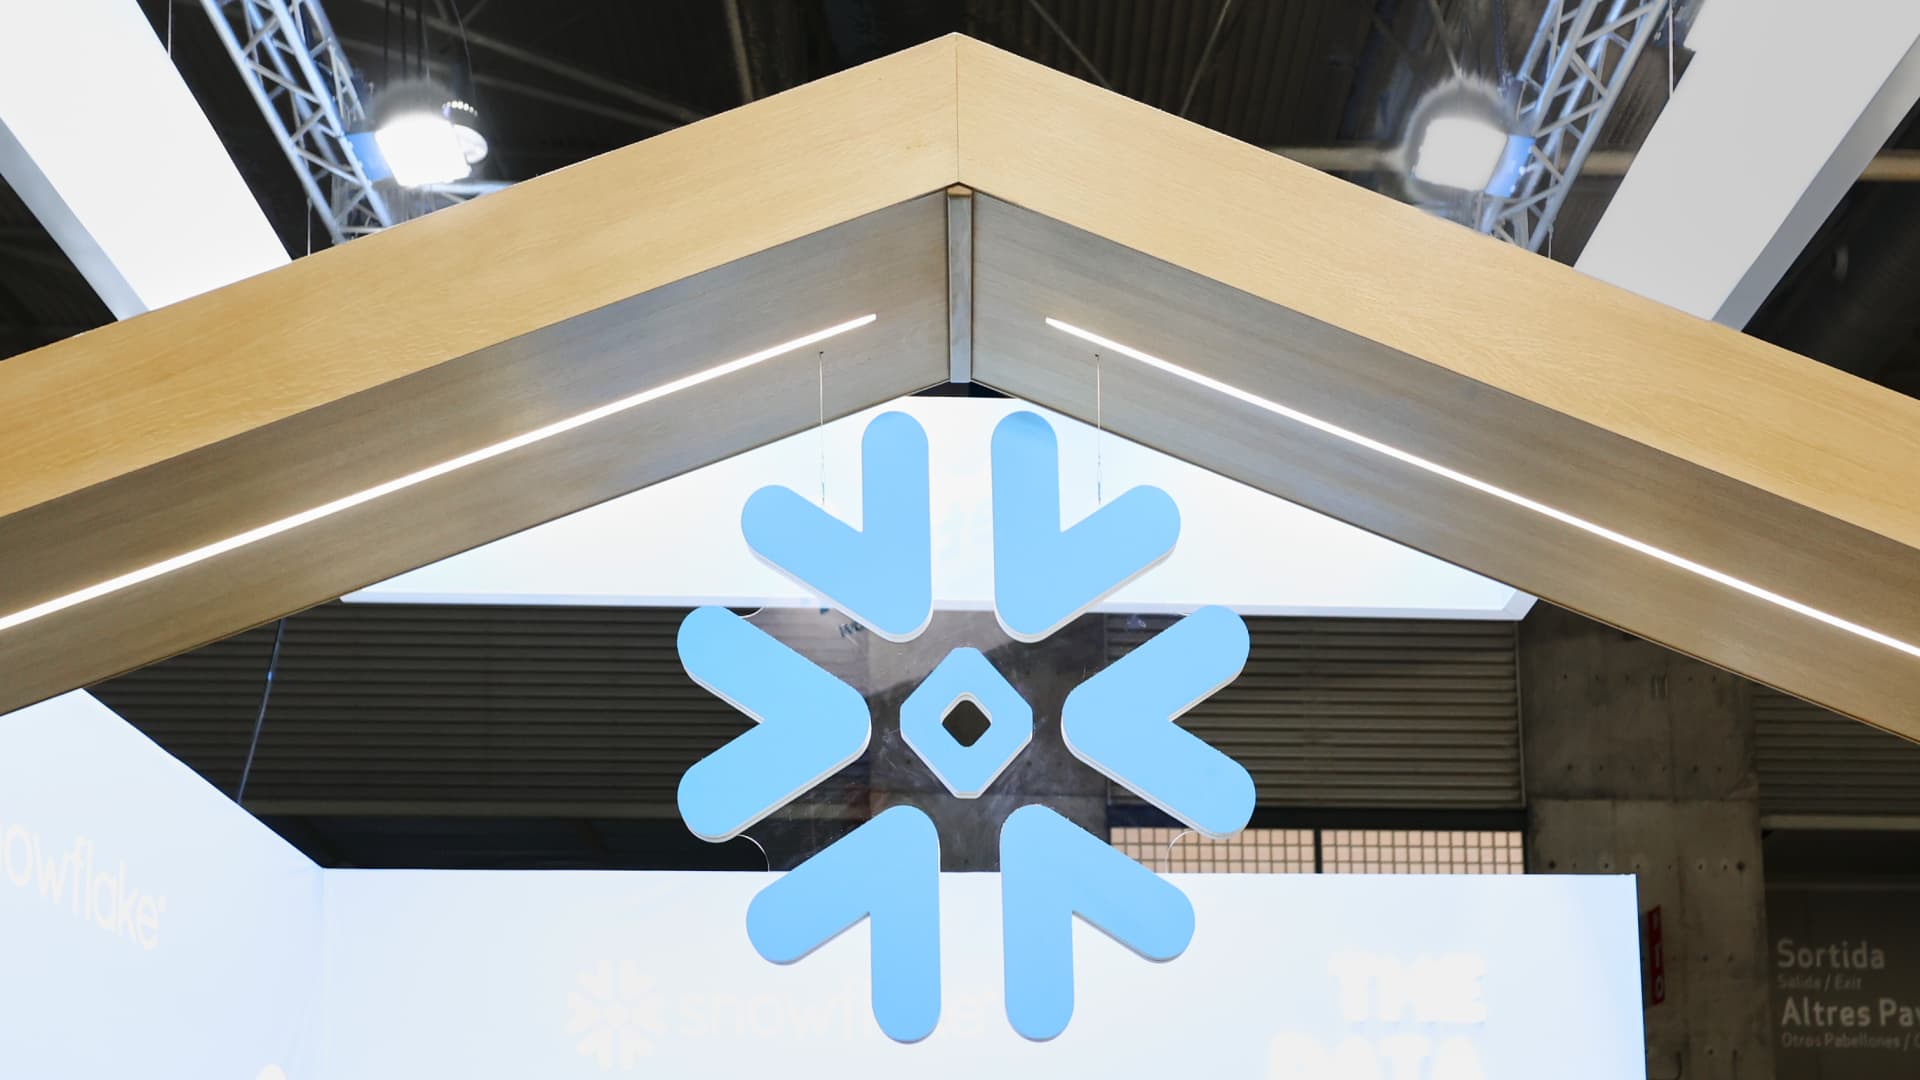 The Snowflake Inc. logo, an American computing-based data cloud company that has a strong partnership with Salesforce, displayed on their stand during the Mobile World Congress 2023 on March 2, 2023, in Barcelona, Spain. 